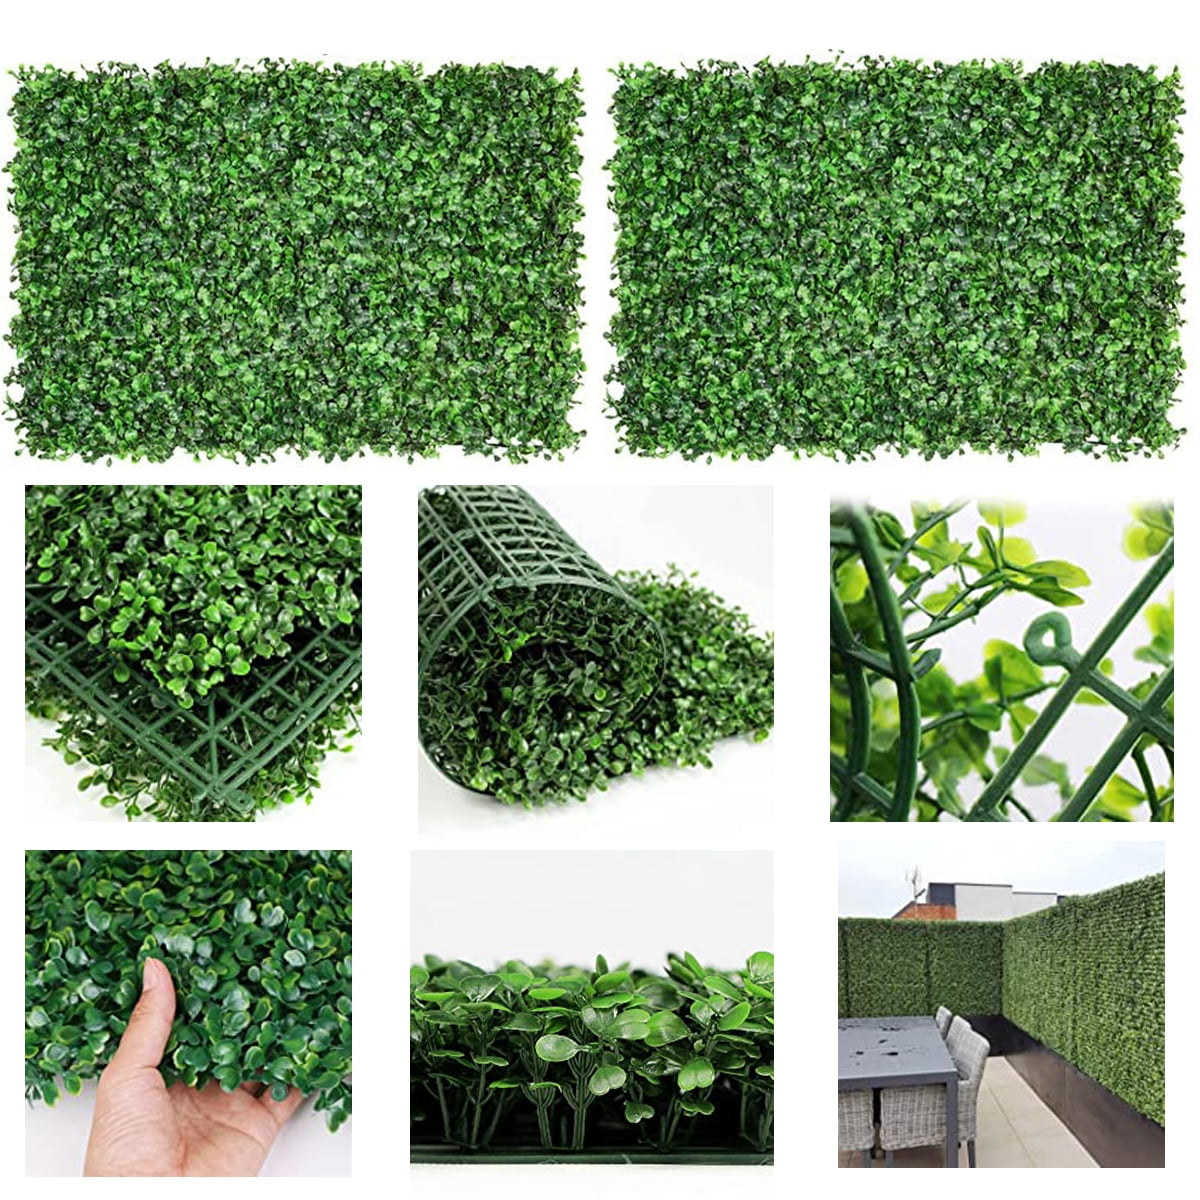 24"x16" Artificial Boxwood Wall Hedge Mat Plant Panels Outdoor Grass Fence,10pcs 